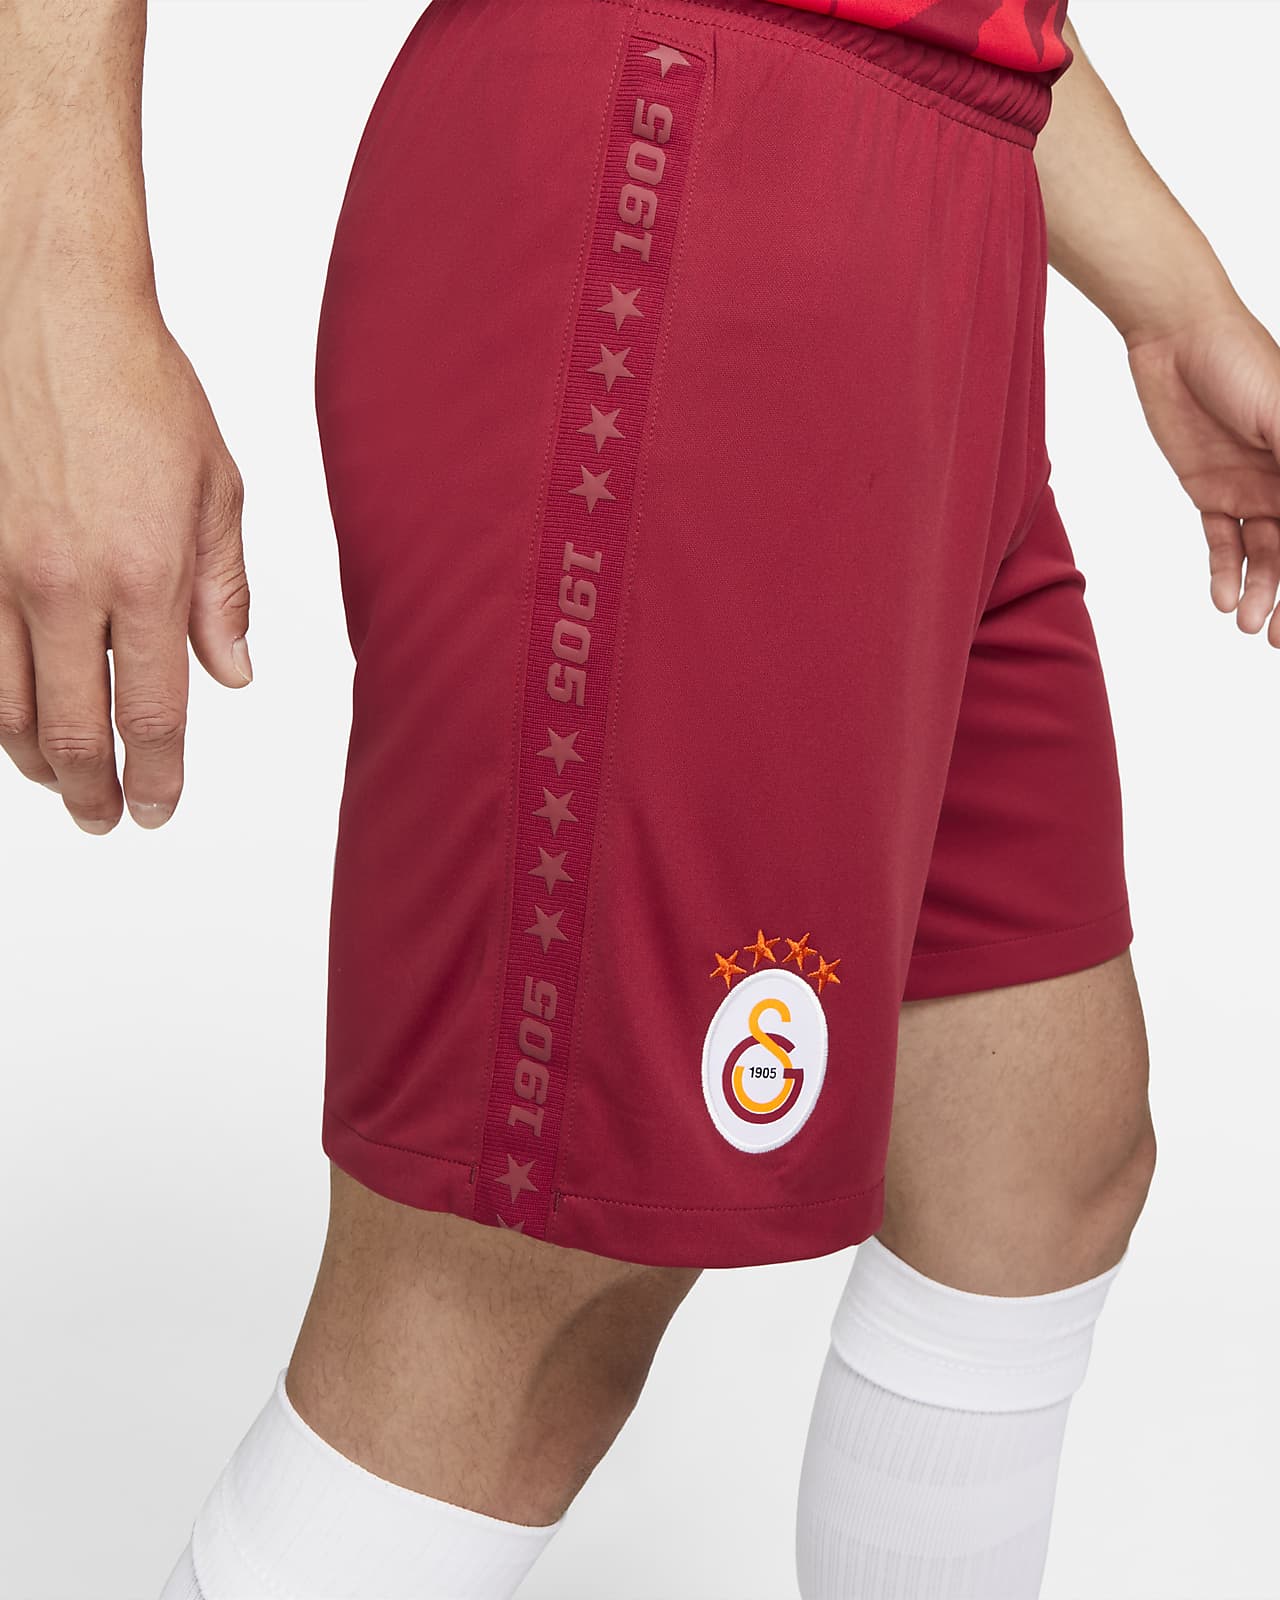 Details about   Galatasaray 2020/21 Match Shorts Official Licensed DHL Express Shipping 